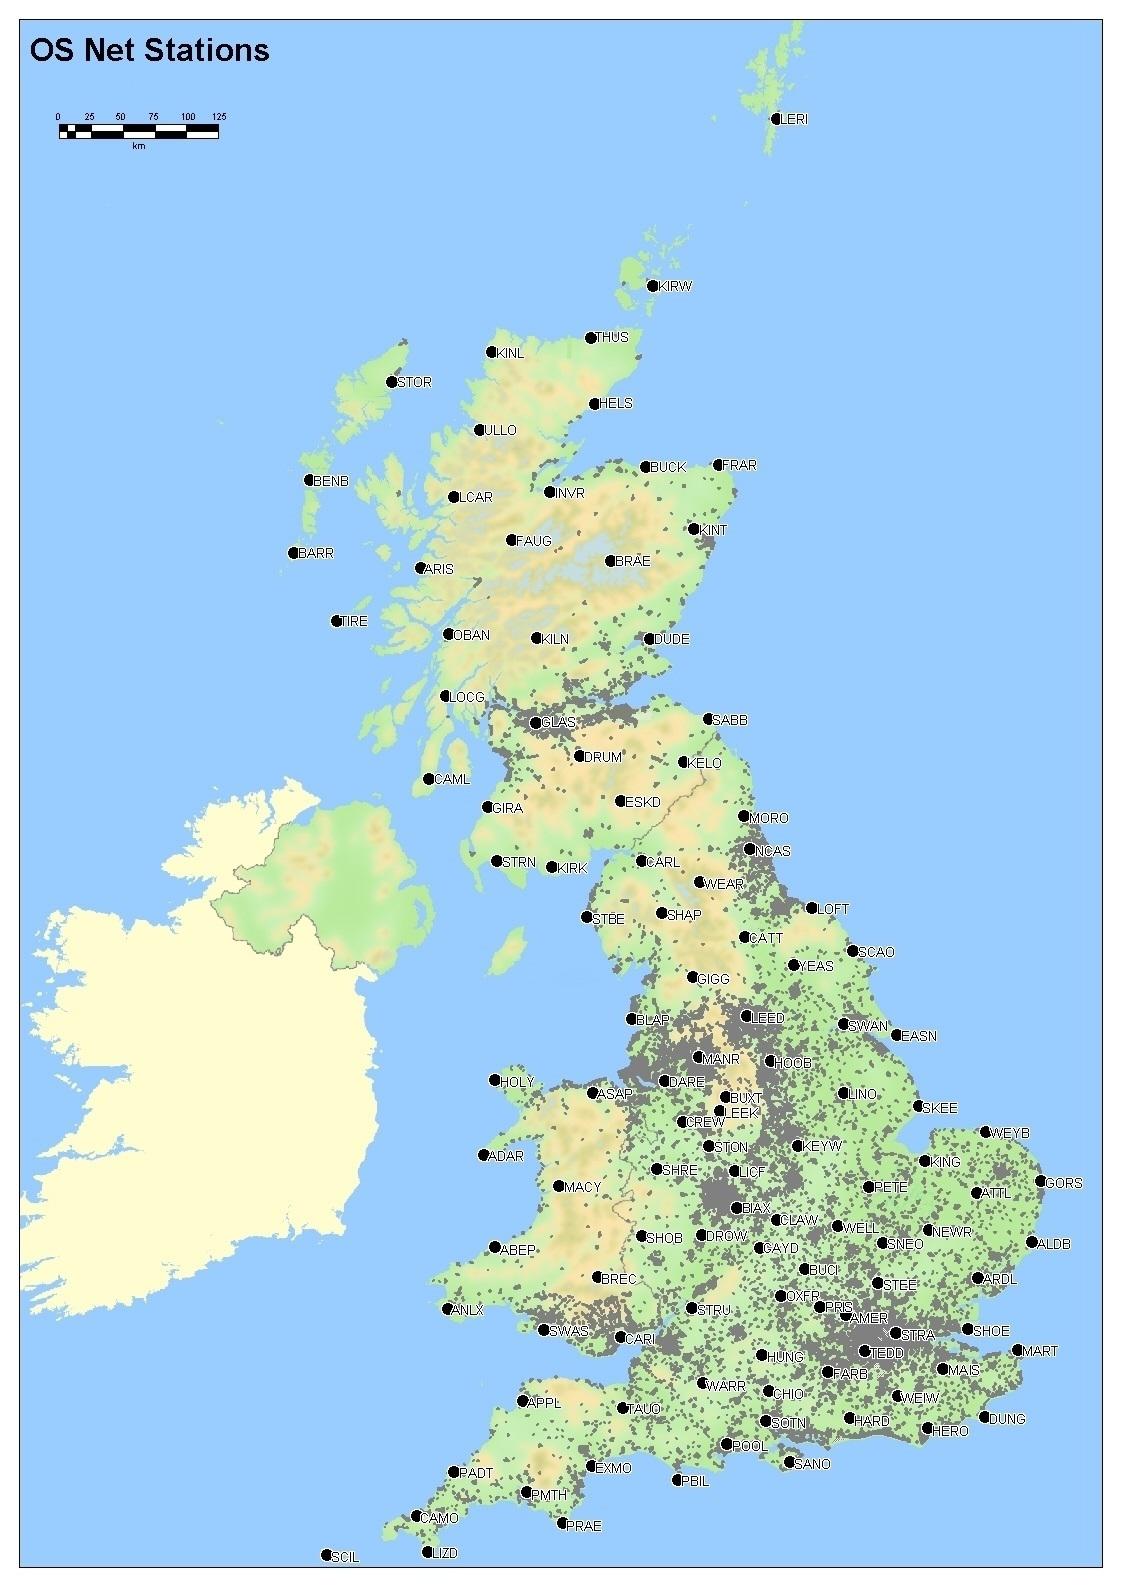 Map of OS Net stations in Great Britain